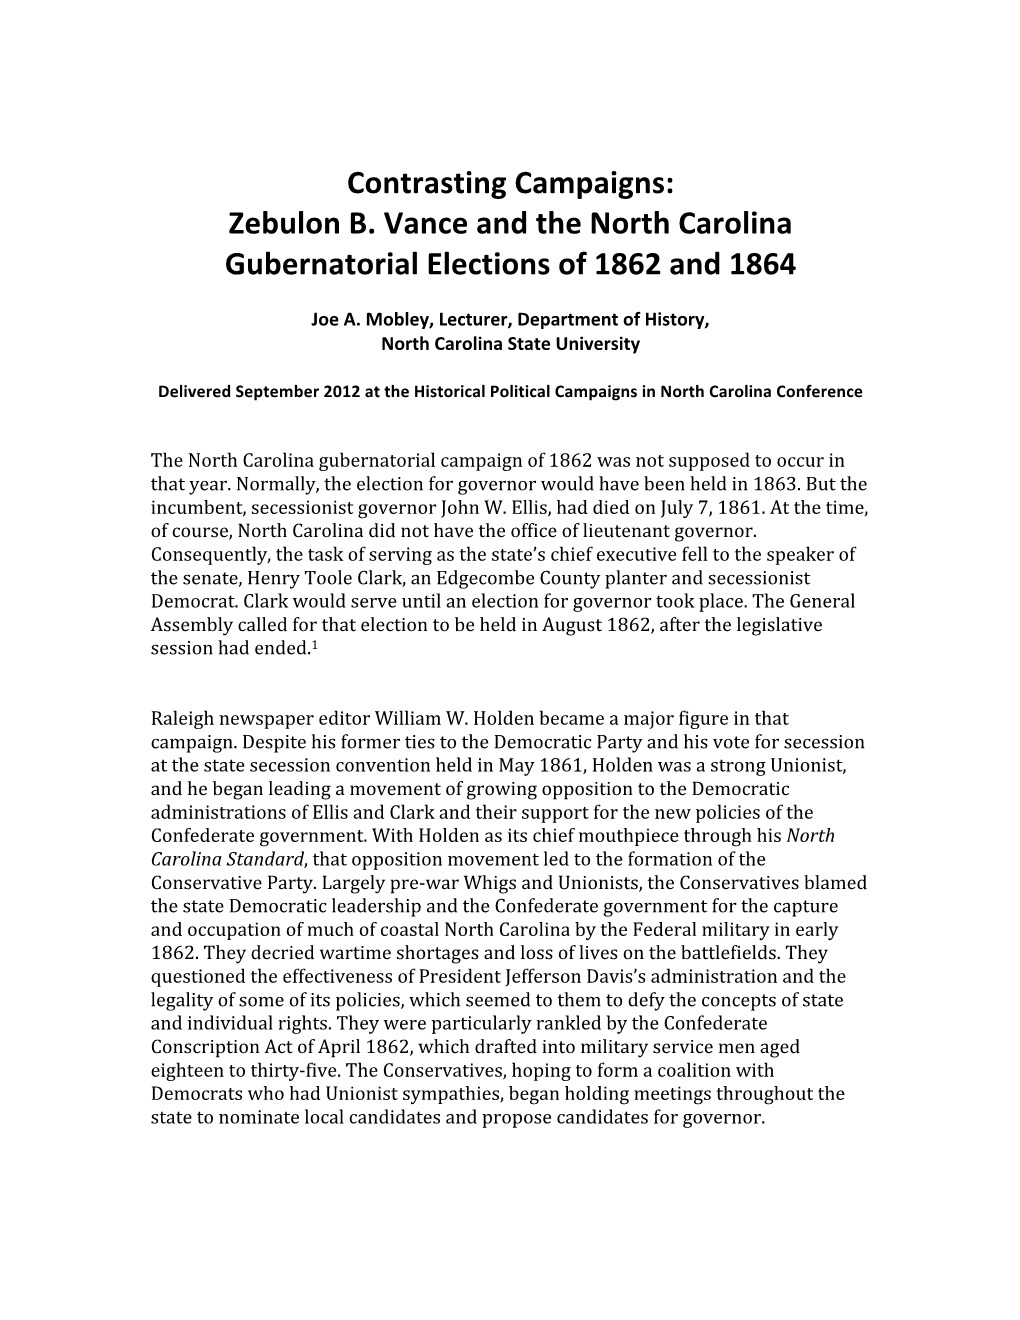 Contrasting Campaigns: Zebulon B. Vance and the North Carolina Gubernatorial Elections of 1862 and 1864